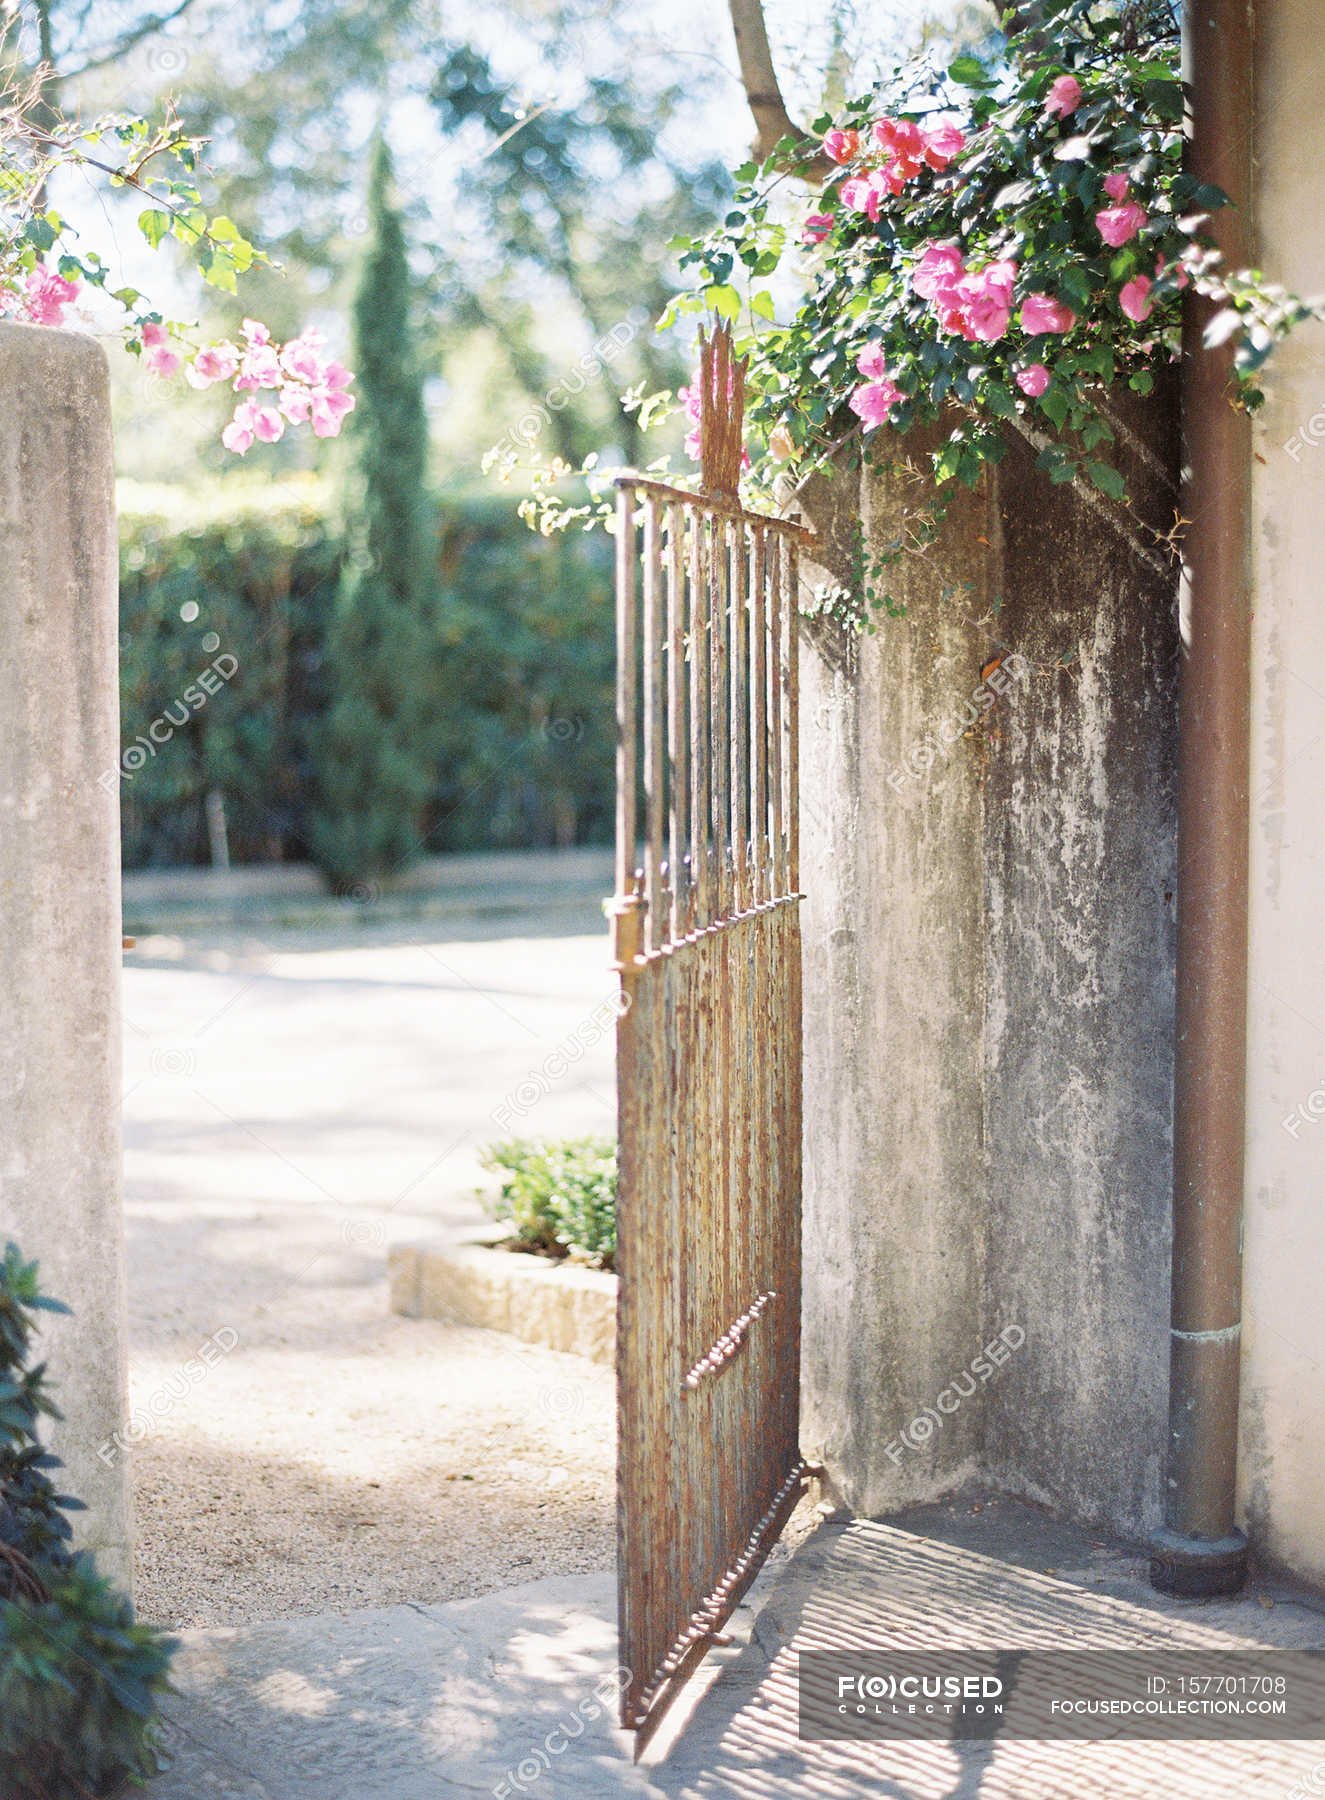 Vintage Metal Gates With Rose Flowers Nature Purity Stock Photo 157701708